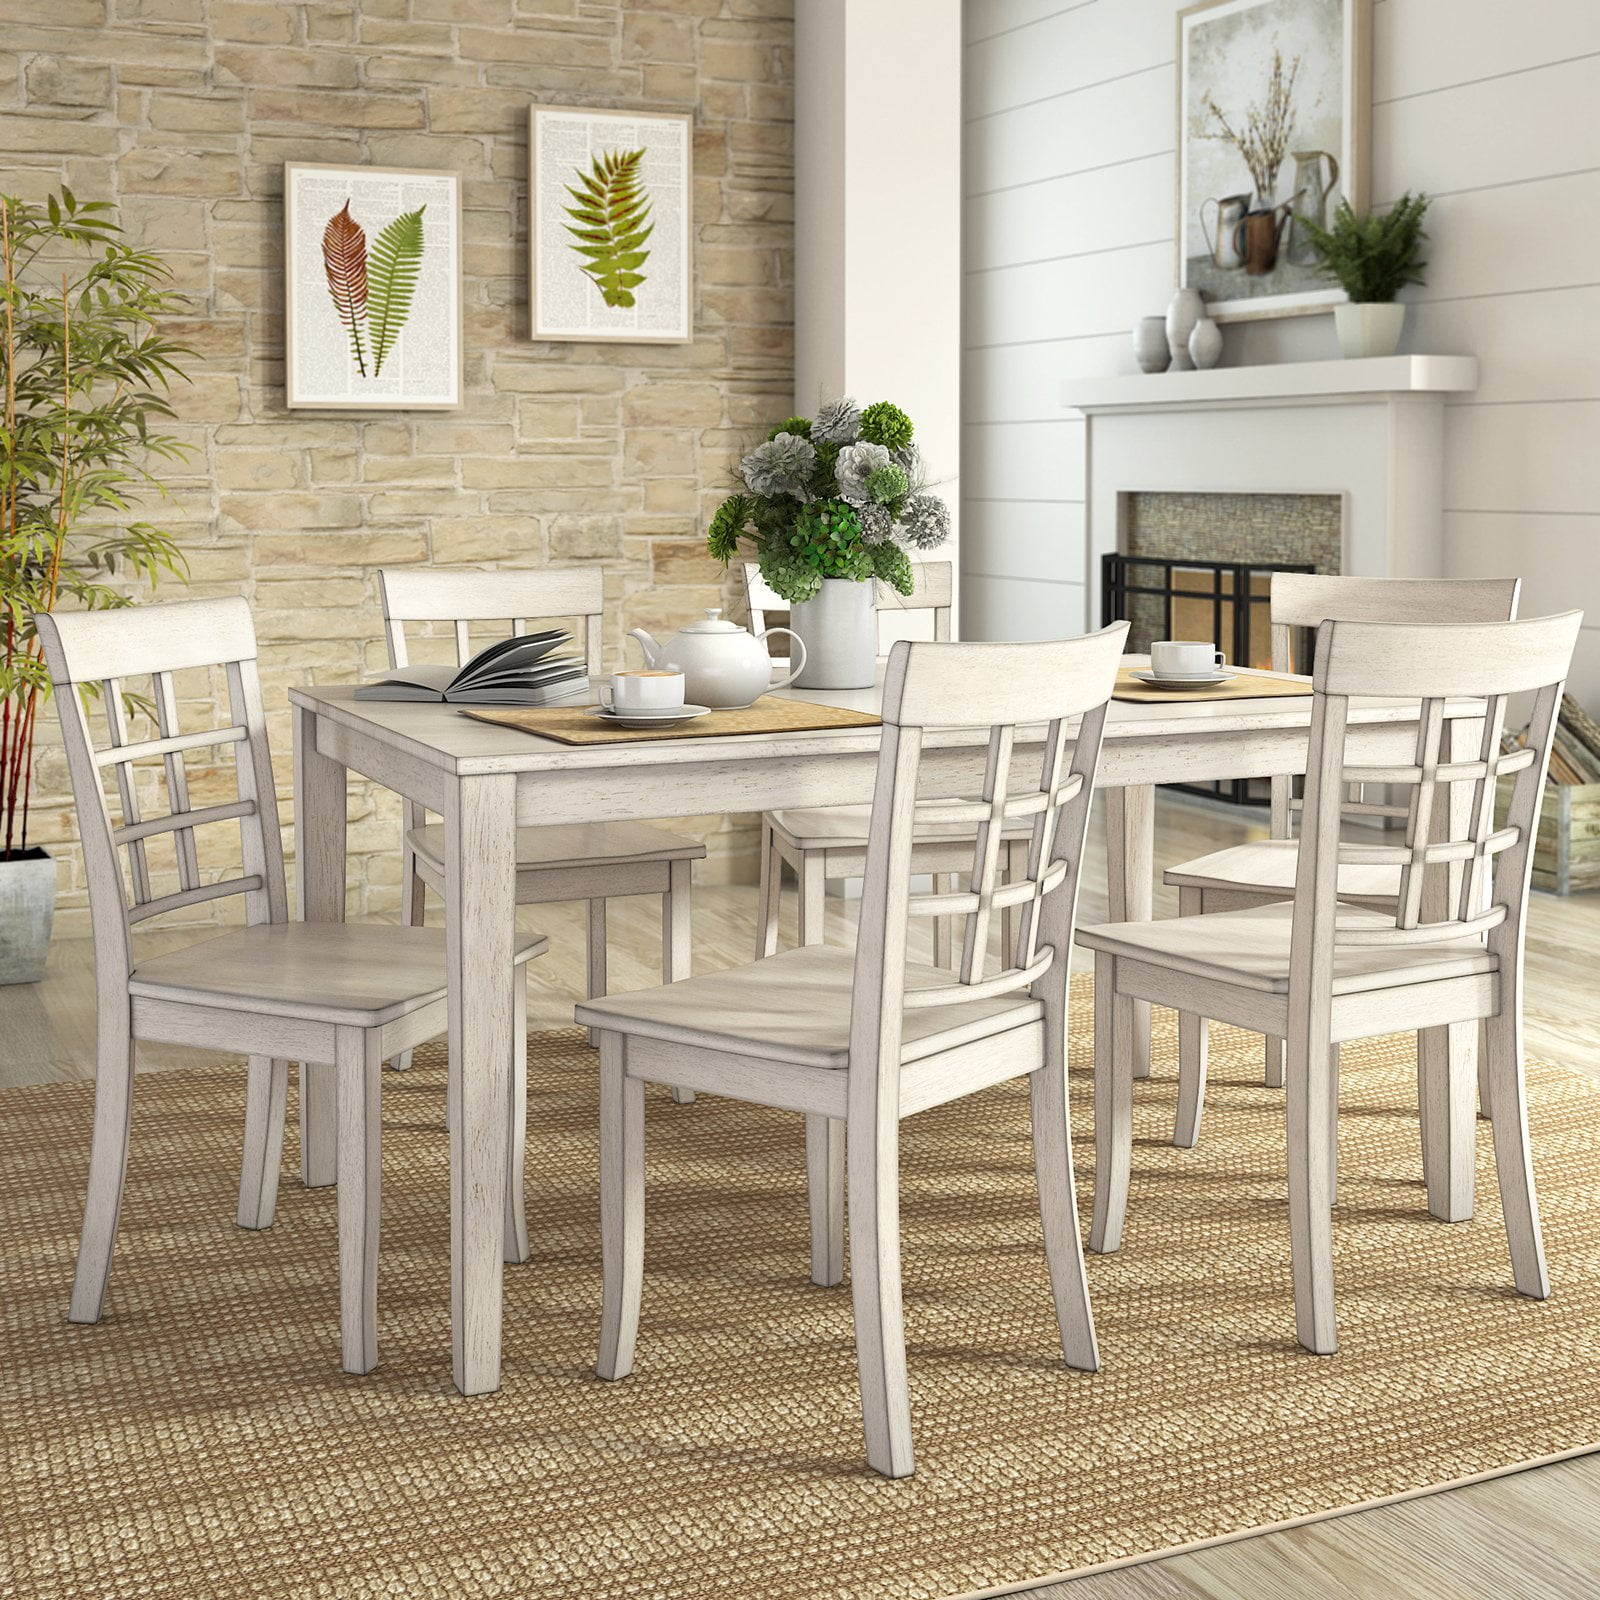 Lexington Large Wood Dining Set with 6 Window Back Chairs, White ...